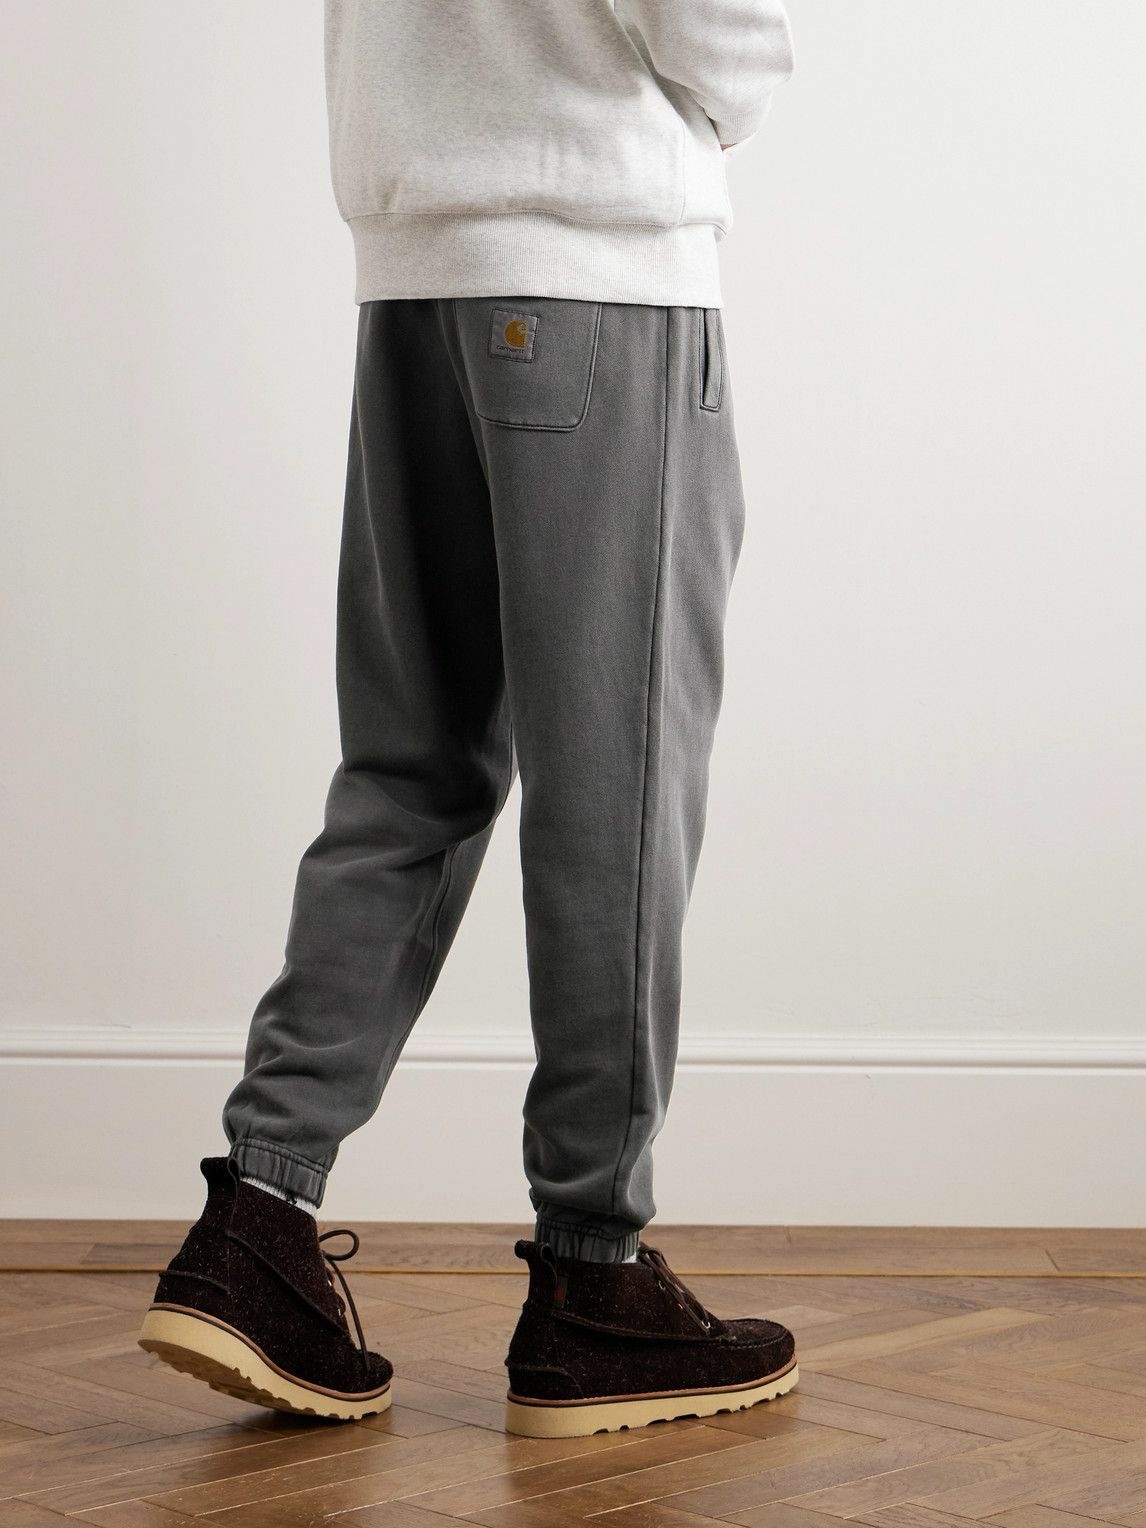 Carhartt WIP - Nelson Tapered Garment-Dyed Cotton-Jersey Sweatpants - Gray